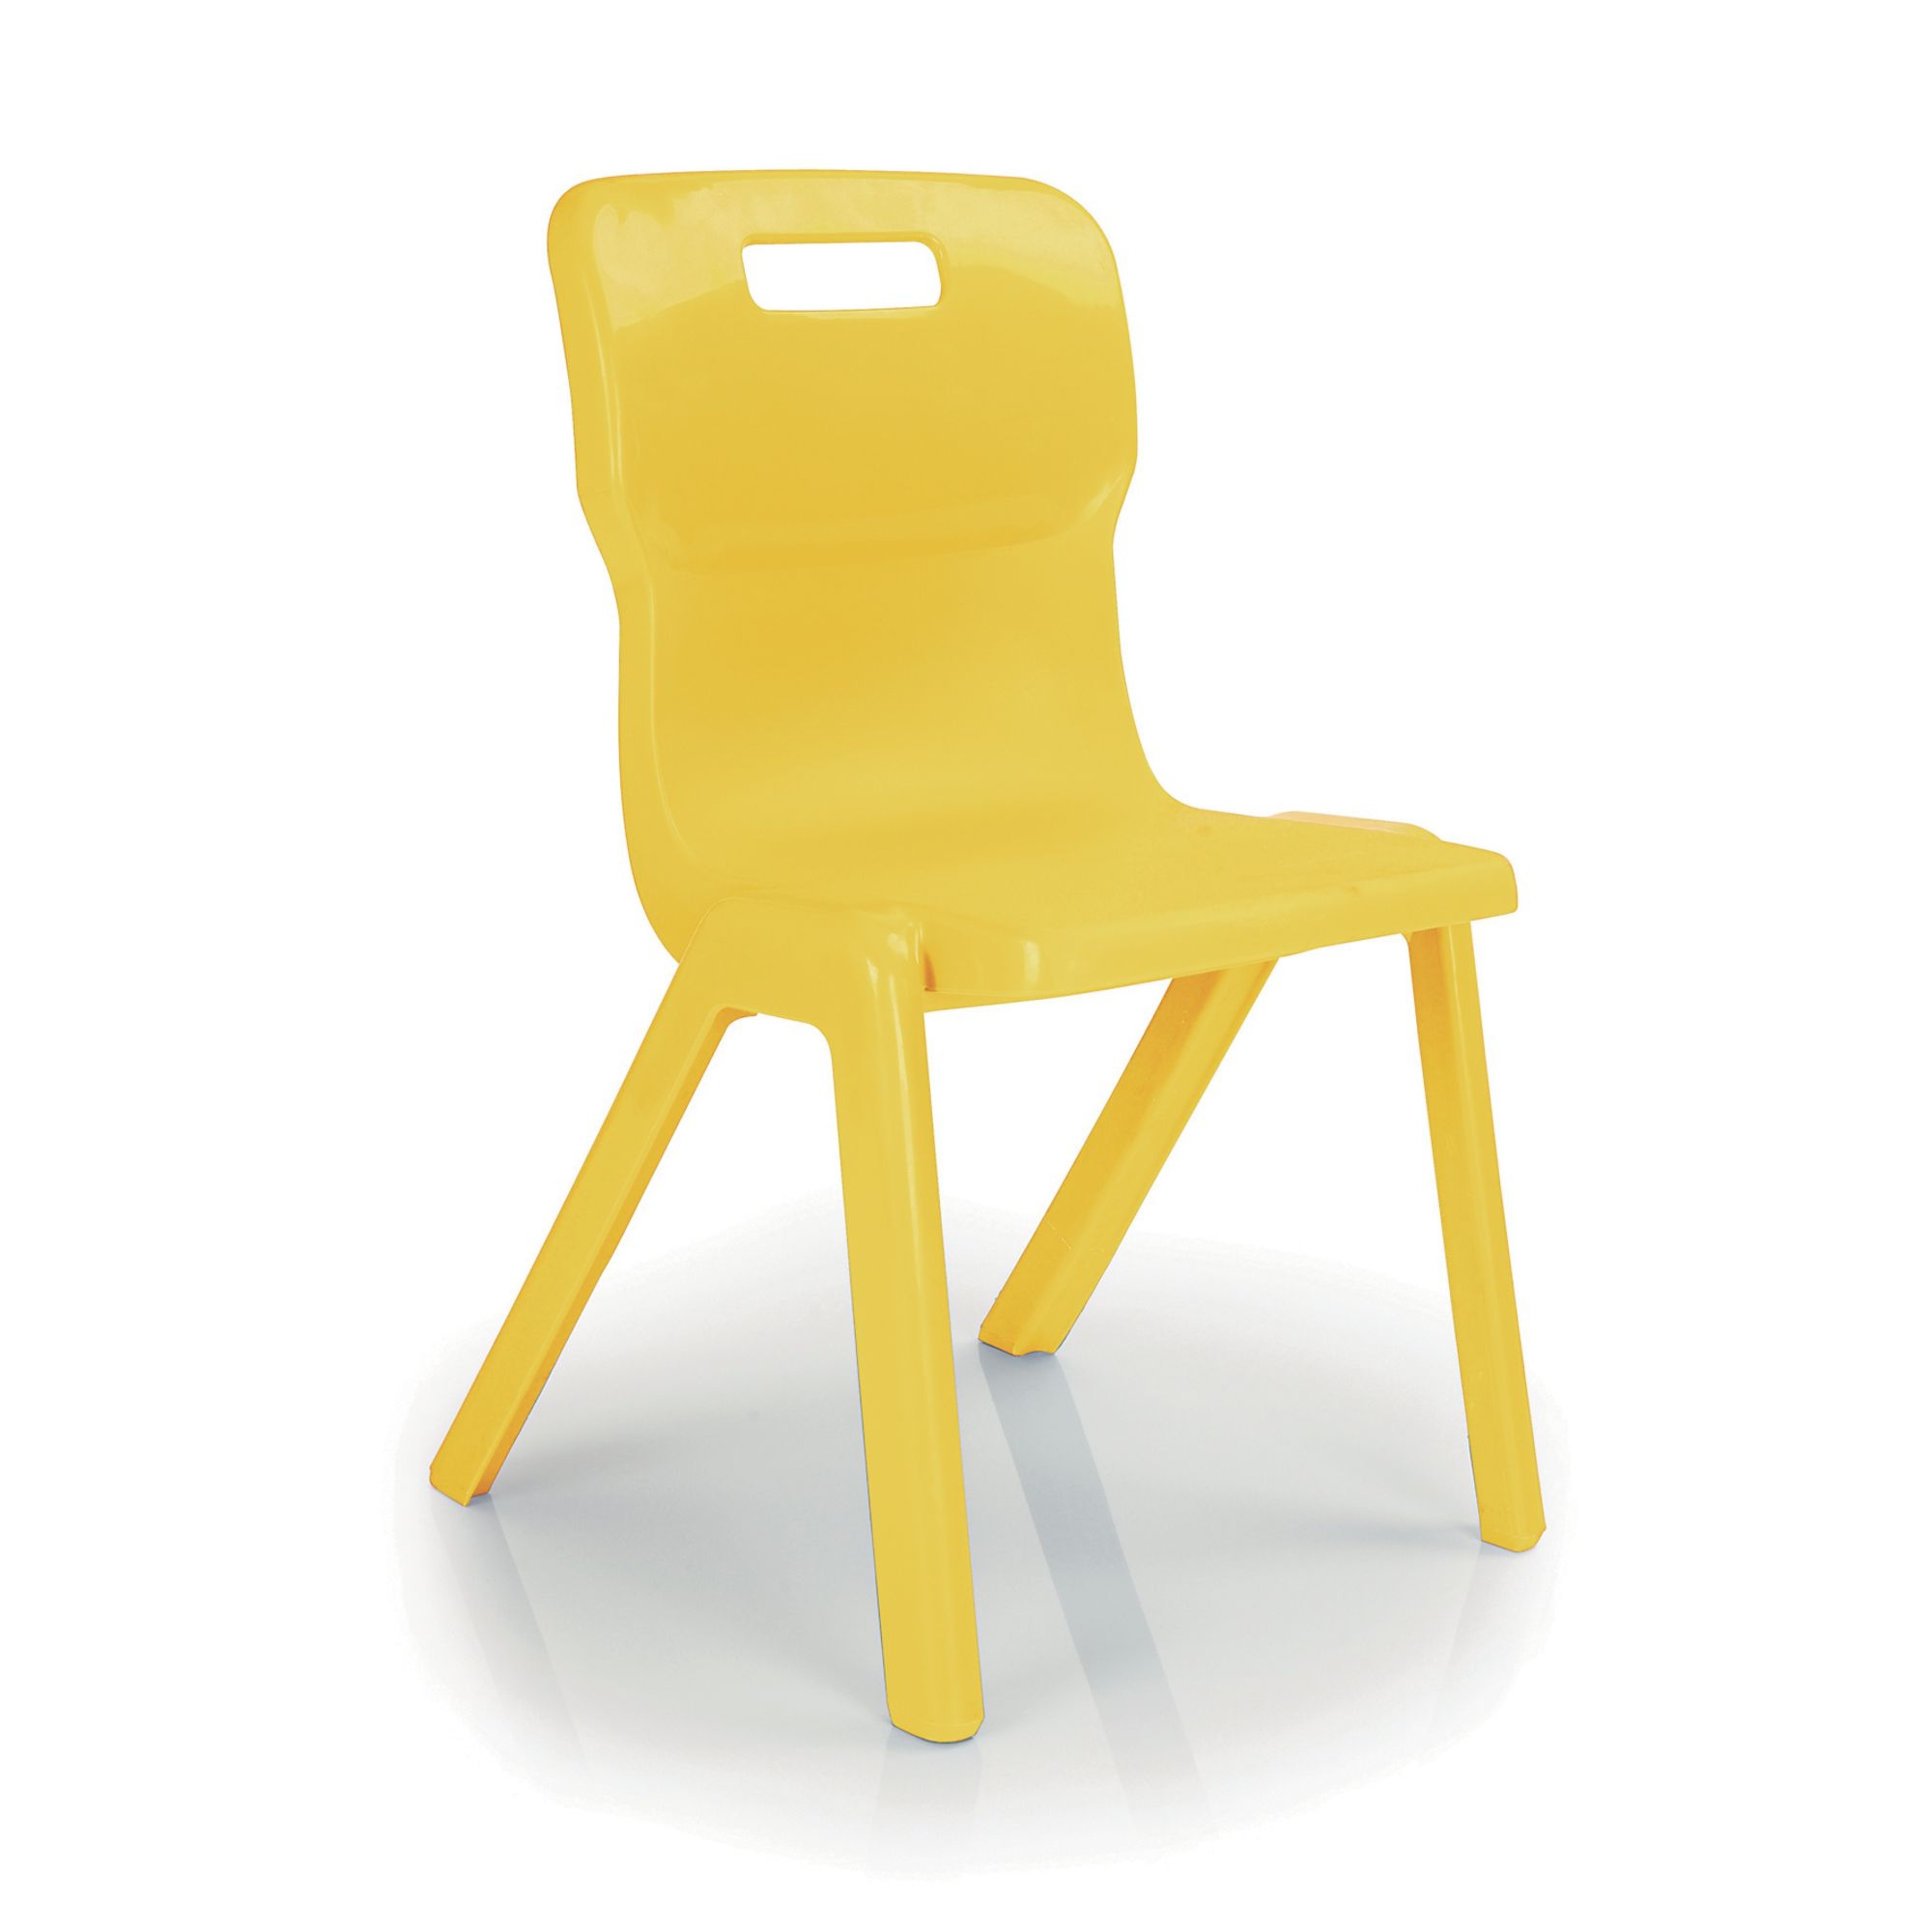 One Piece Titan Chair - Size 1 Ages 3-4 Yellow